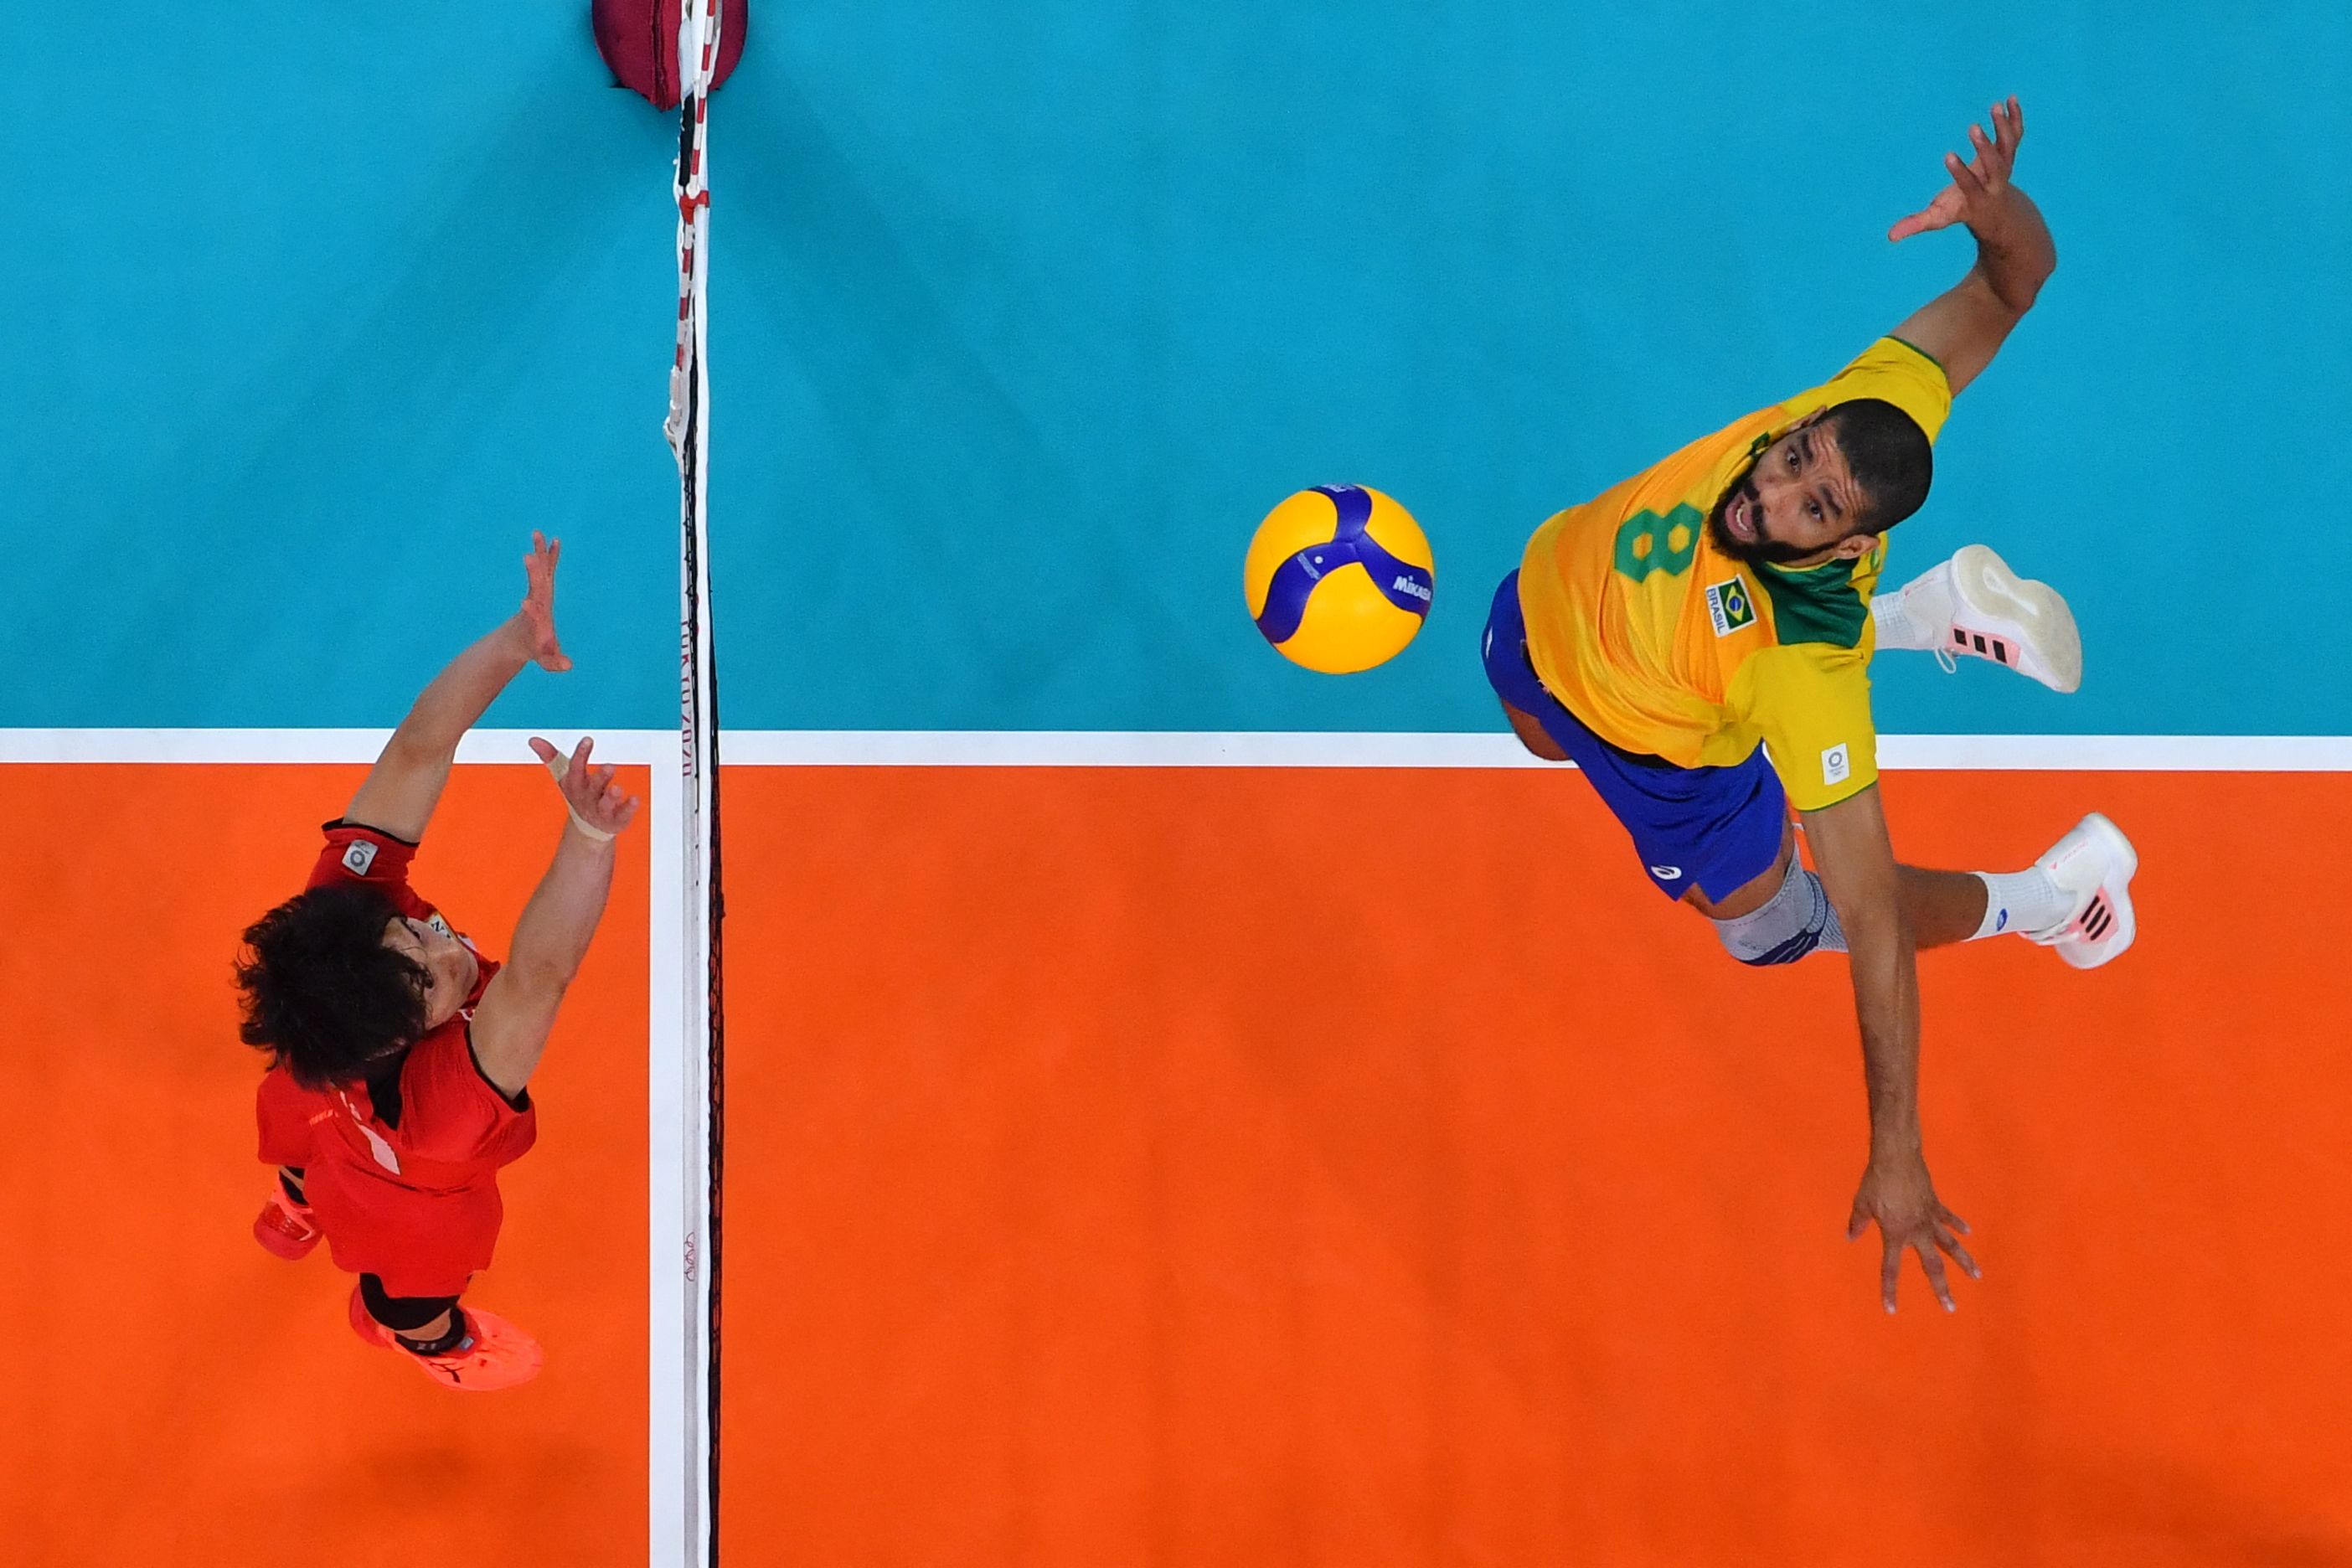 Brazil's Wallace de Souza (R) spikes the ball in the men's quarter-final volleyball match between Japan and Brazil during the Tokyo 2020 Olympic Games at Ariake Arena in Tokyo on August 3